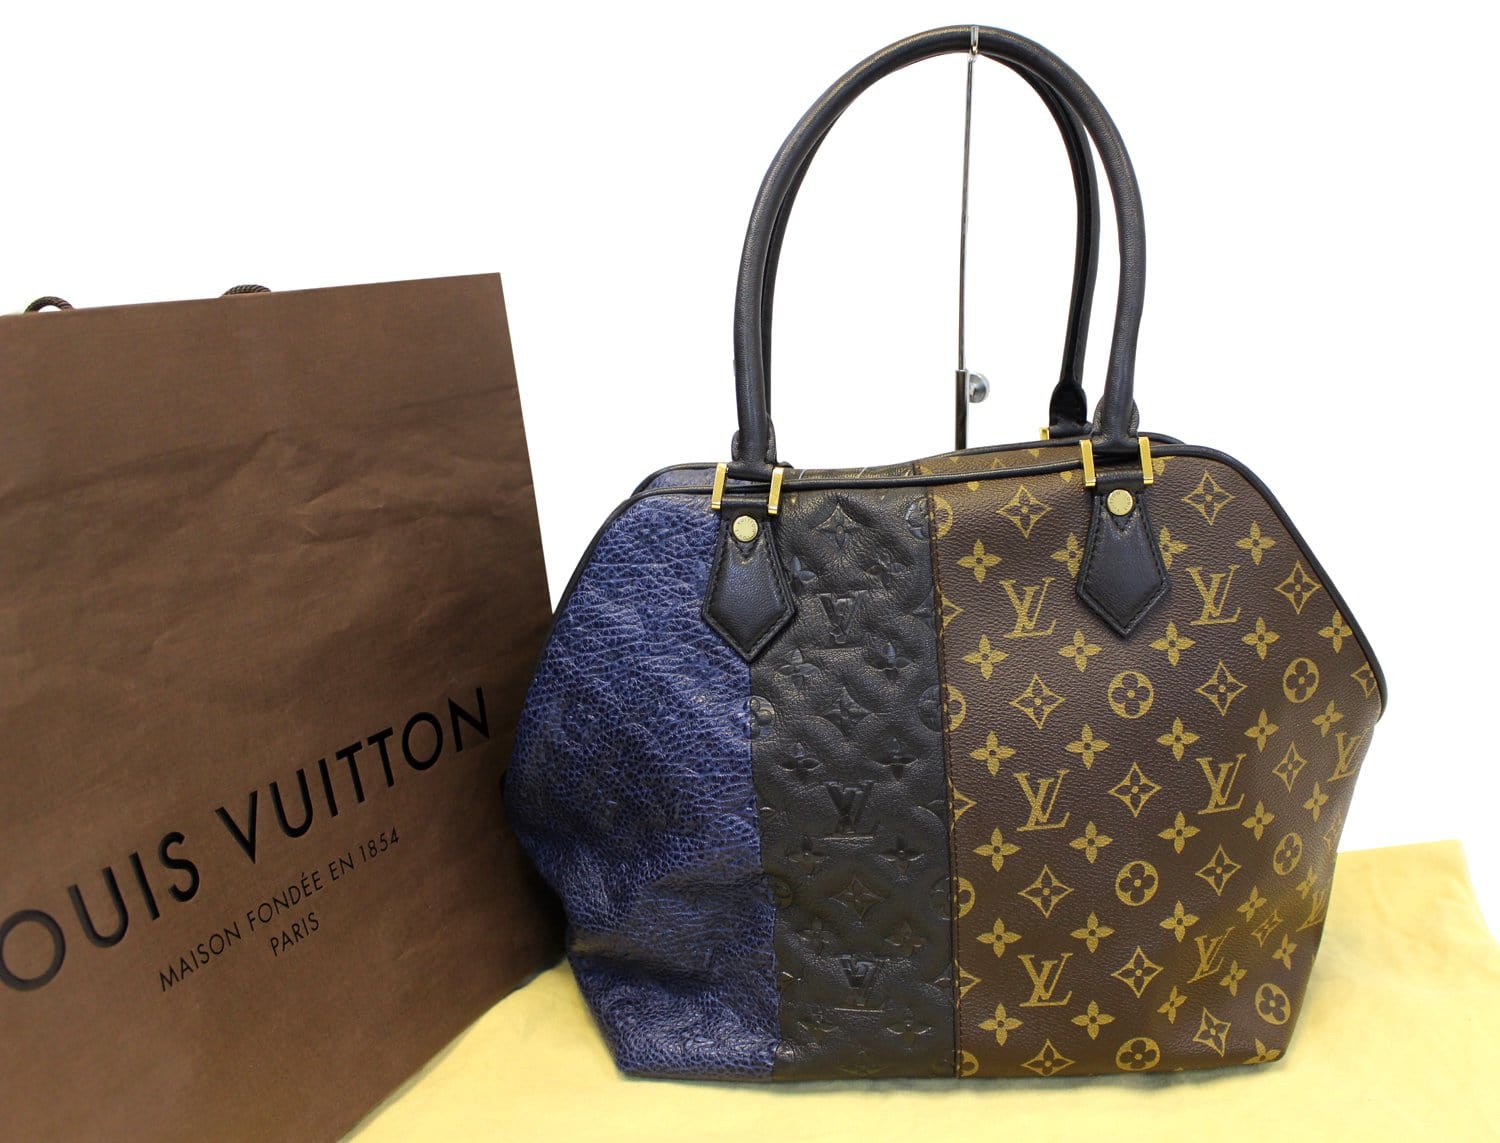 Class and style  Bags, Louis vuitton monogram, Bags & totes